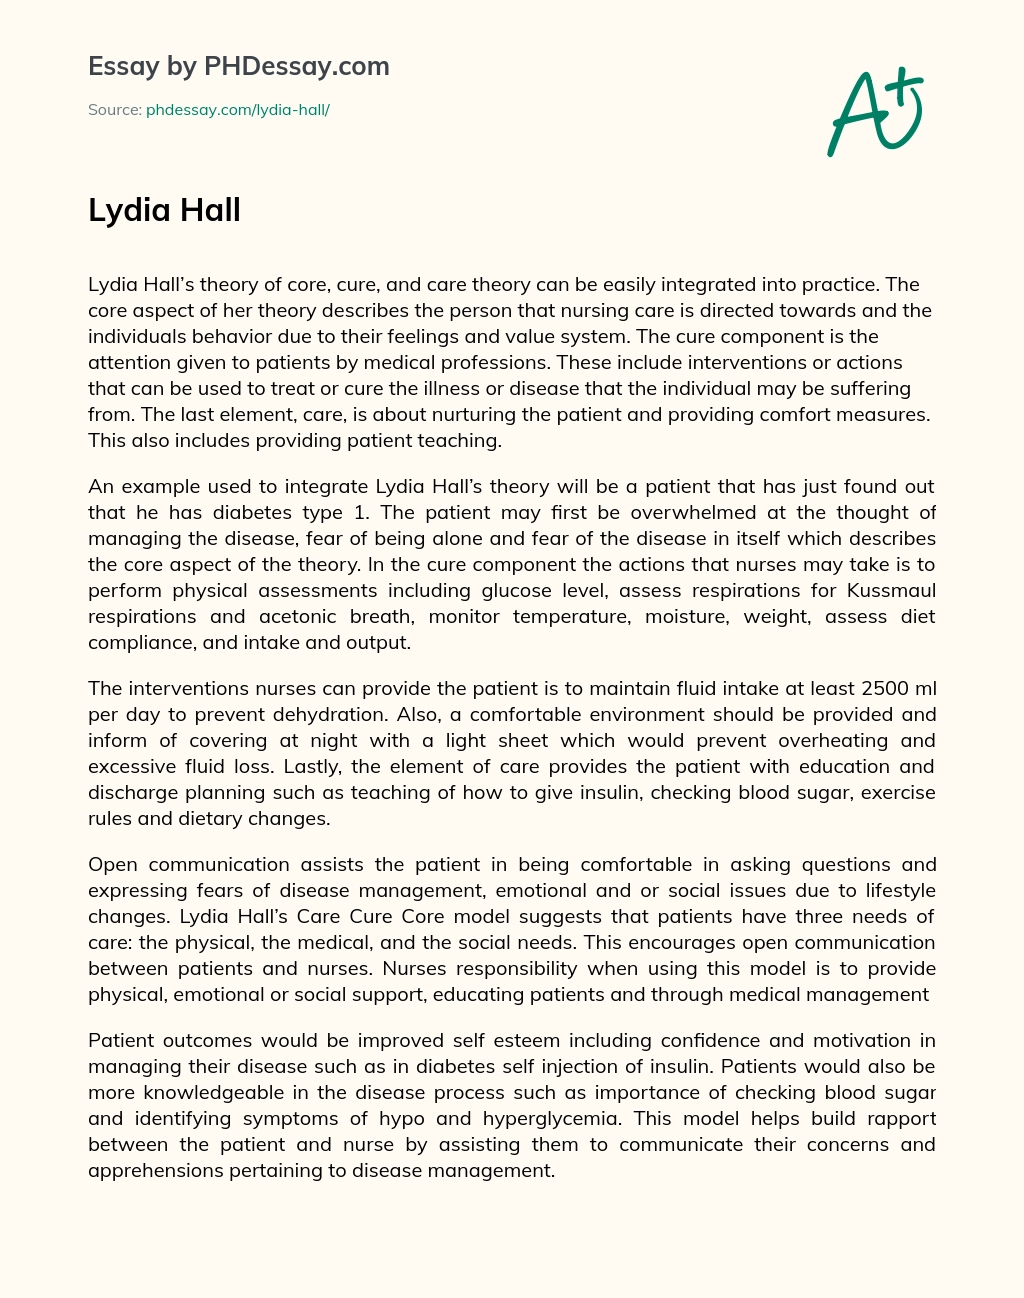 Lydia Hall’s Core, Cure, and Care Theory in Nursing Practice essay